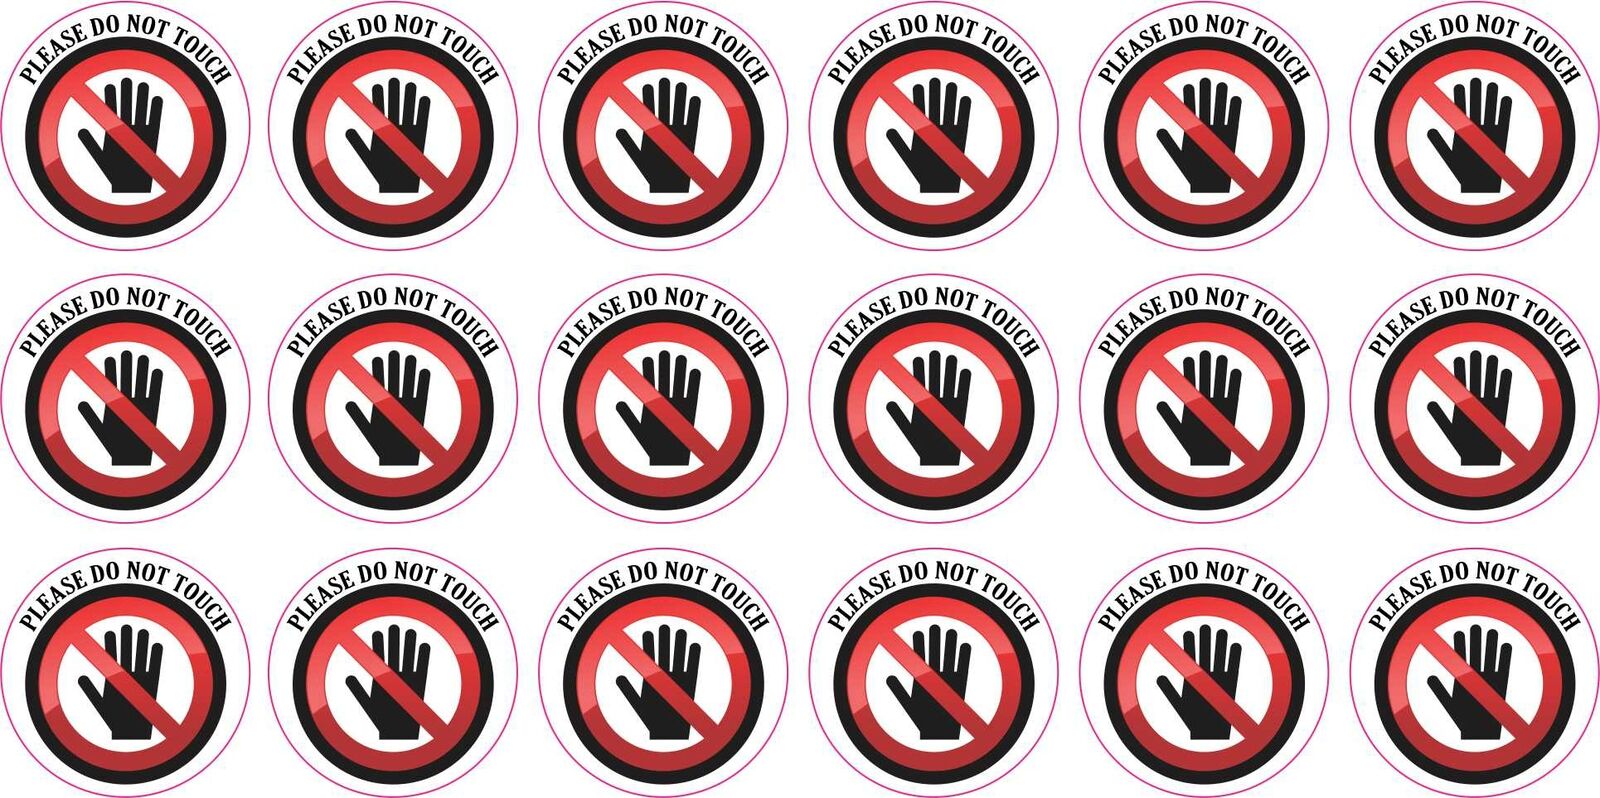 1in x 1in Please Do Not Touch Vinyl Stickers Business Sign Label Decals